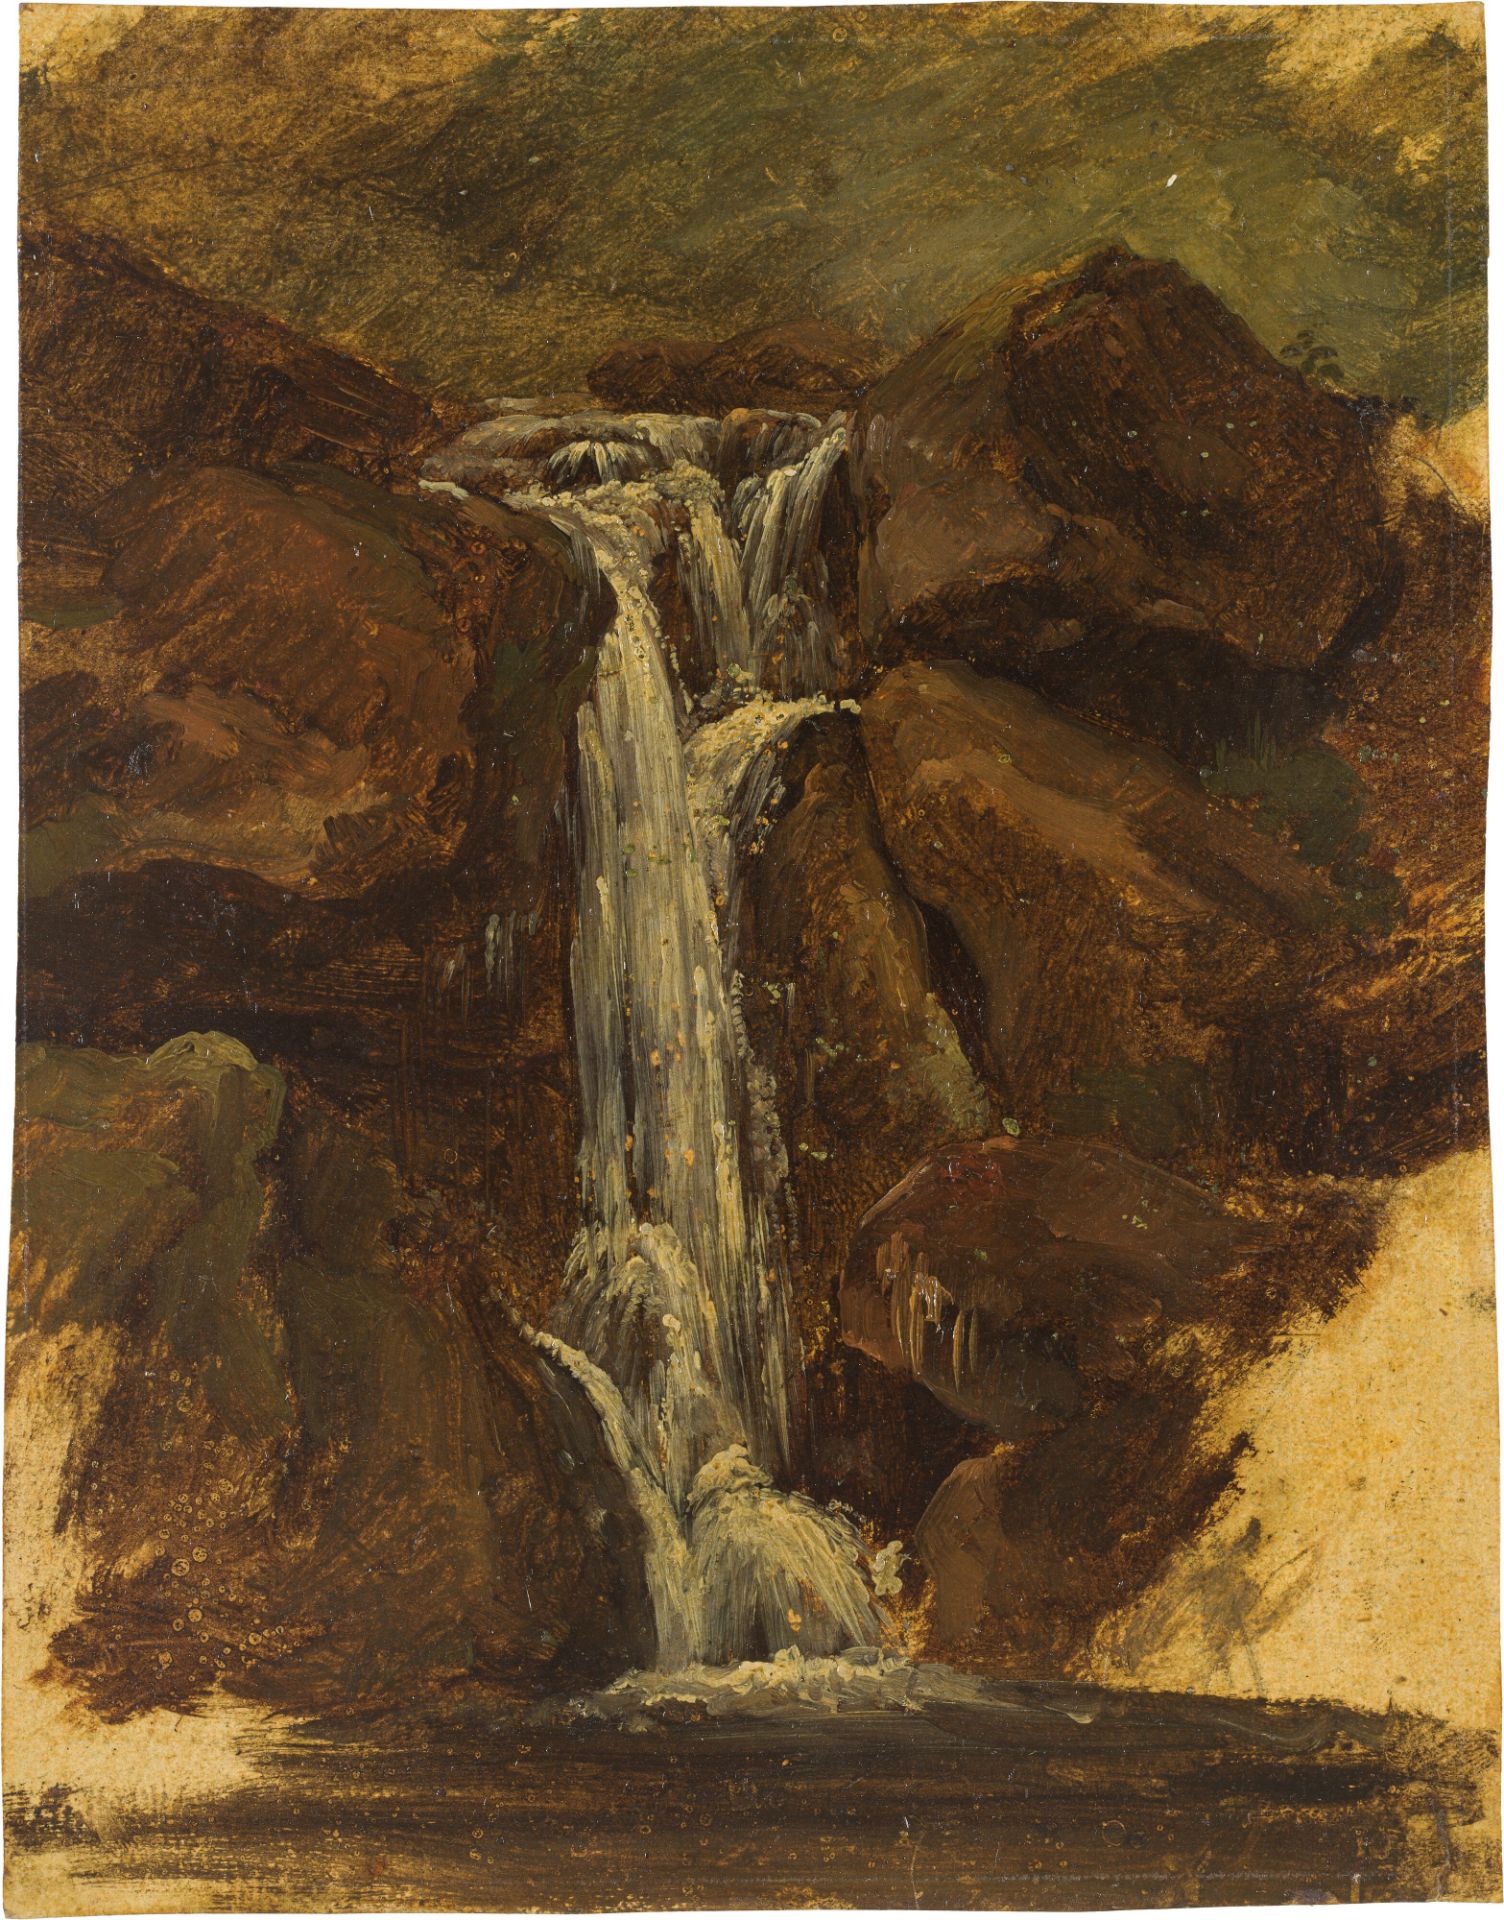 Friedrich GauermannWaterfall (nature study)oil on paper; framed23.5 x 18.5 cmauction house Wawra, - Image 2 of 3